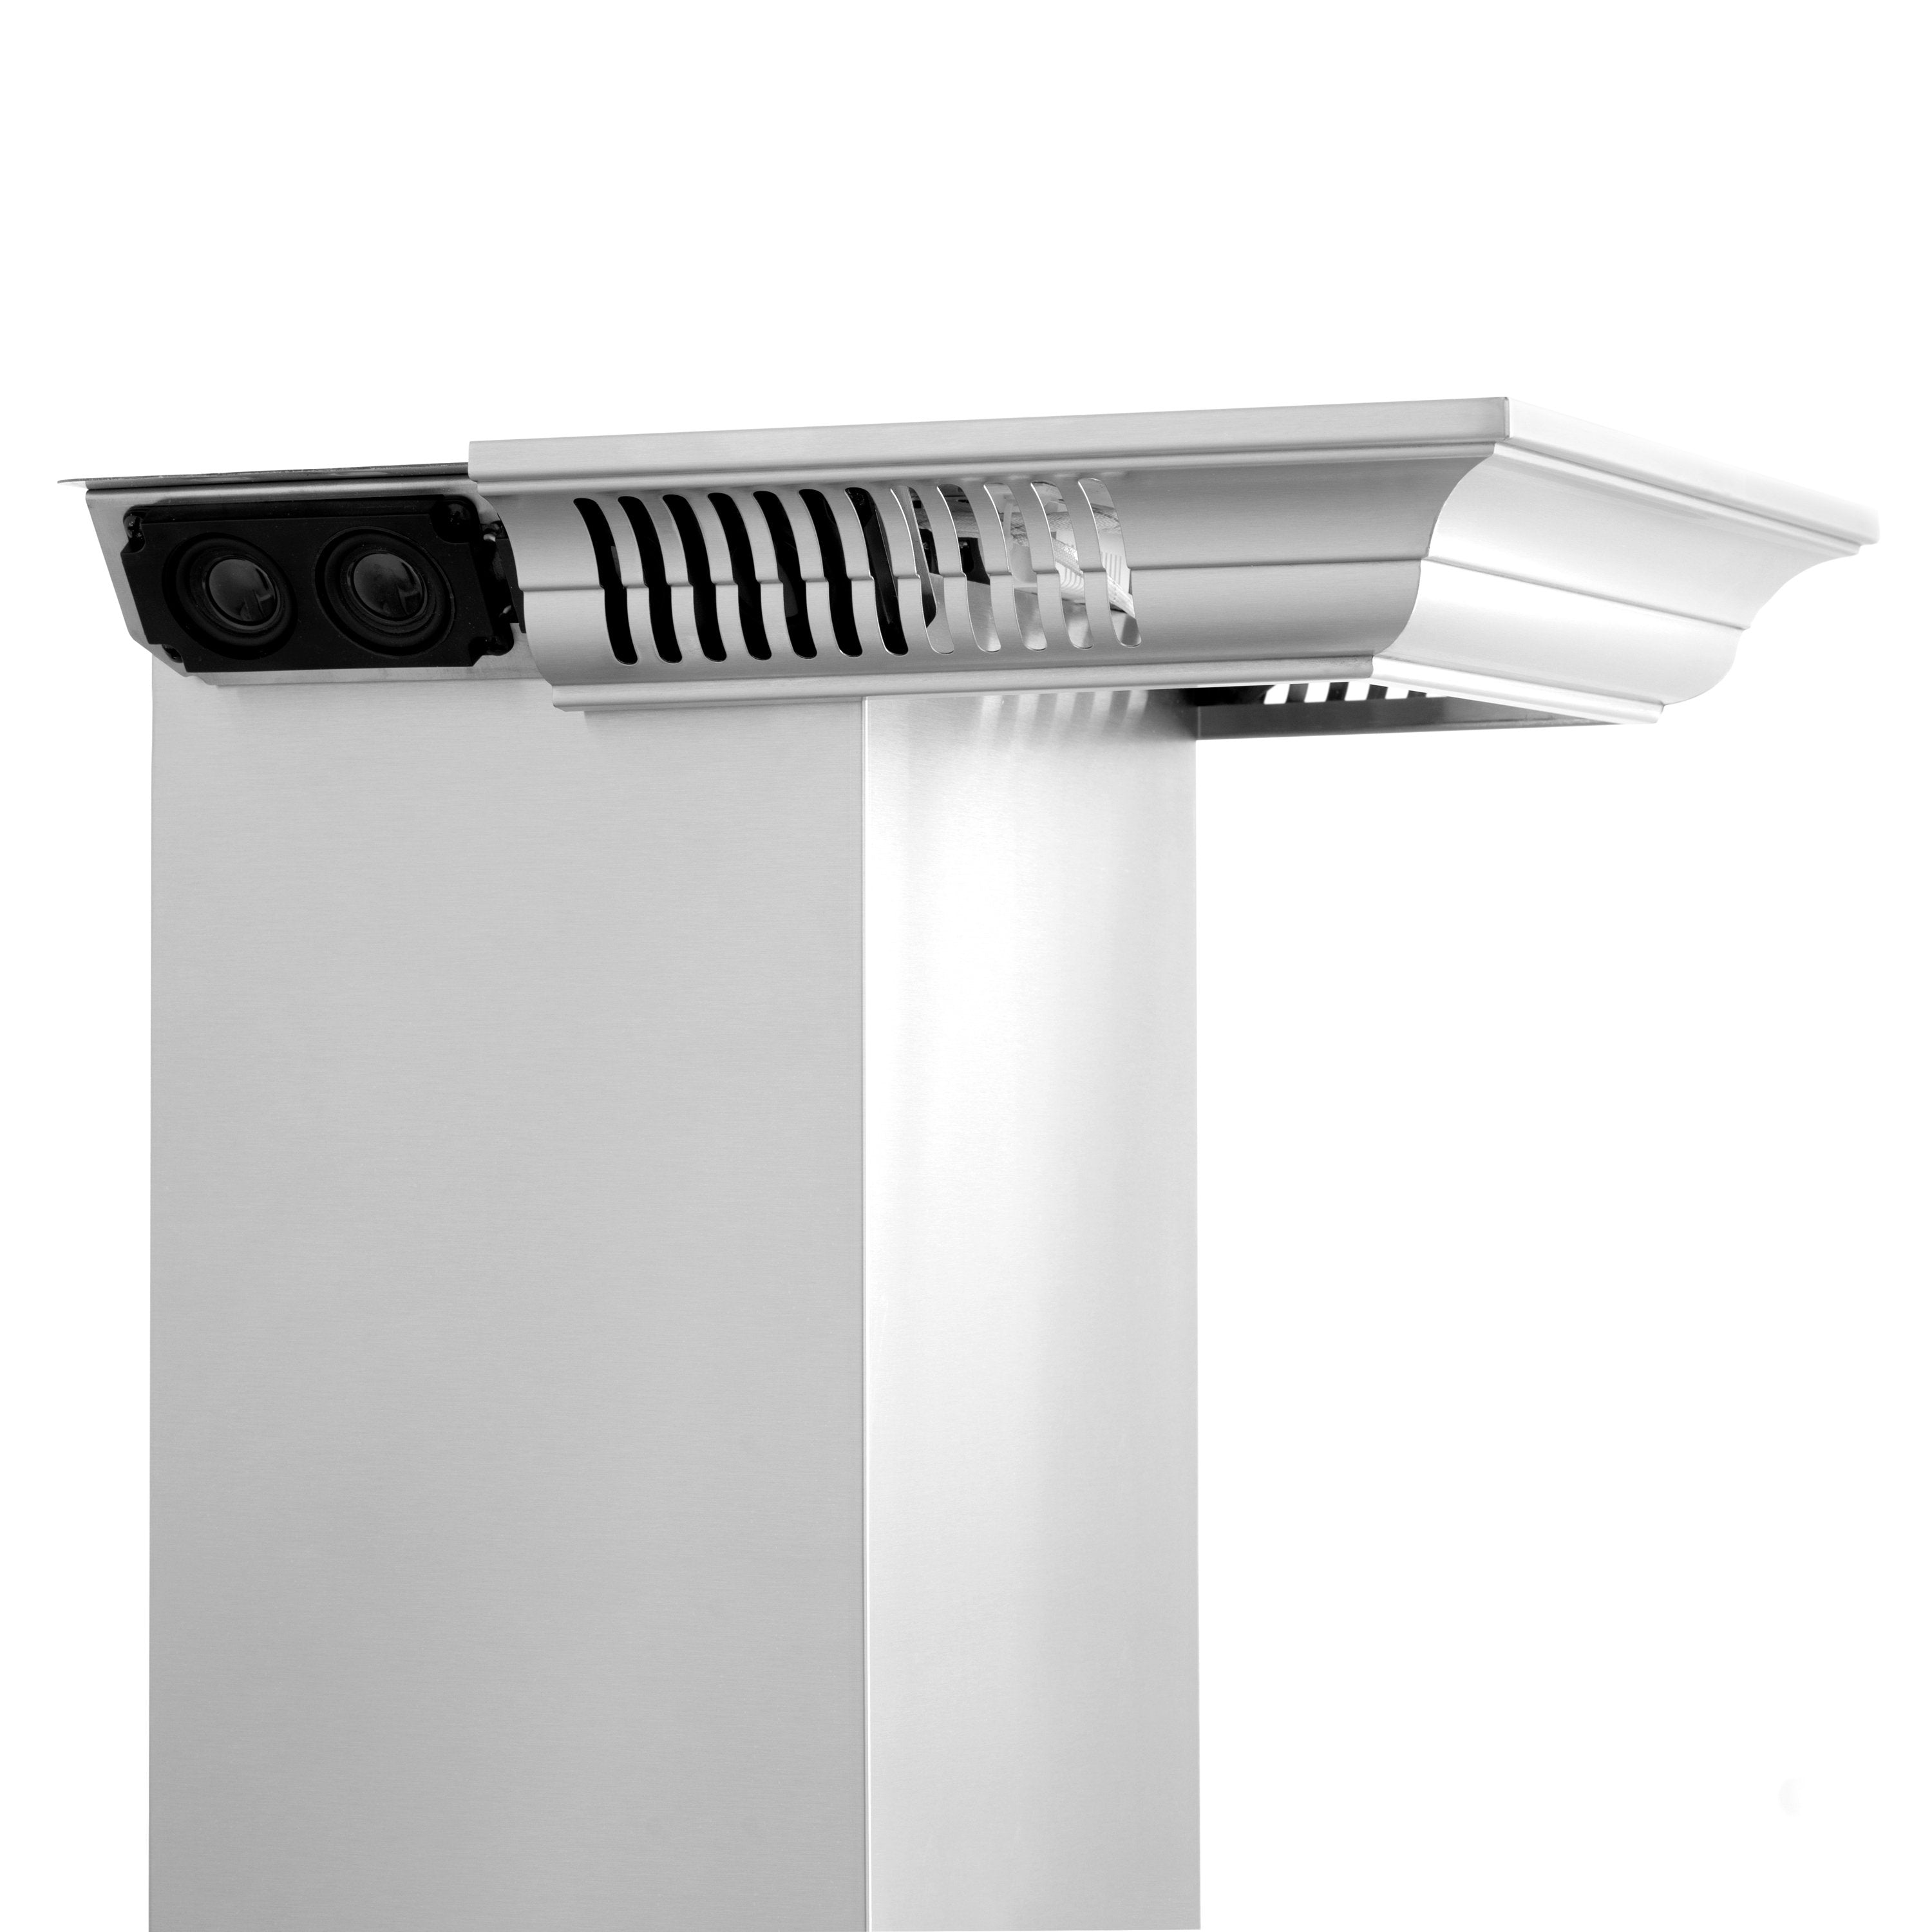 36" ZLINE CrownSound‚ Ducted Vent Wall Mount Range Hood in Stainless Steel with Built-in Bluetooth Speakers (KF1CRN-BT-36)